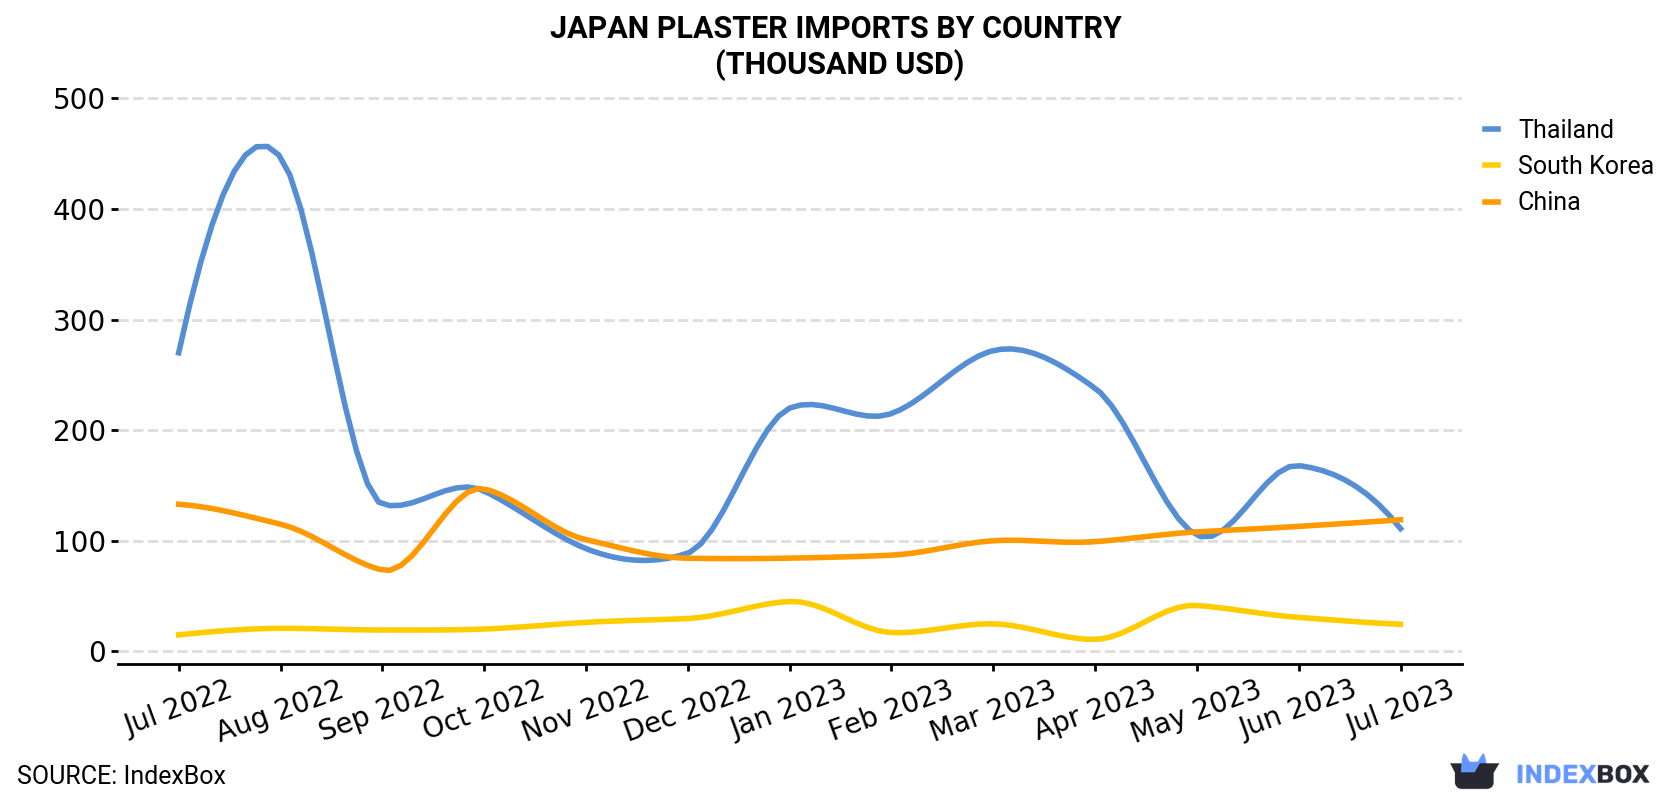 Japan Plaster Imports By Country (Thousand USD)